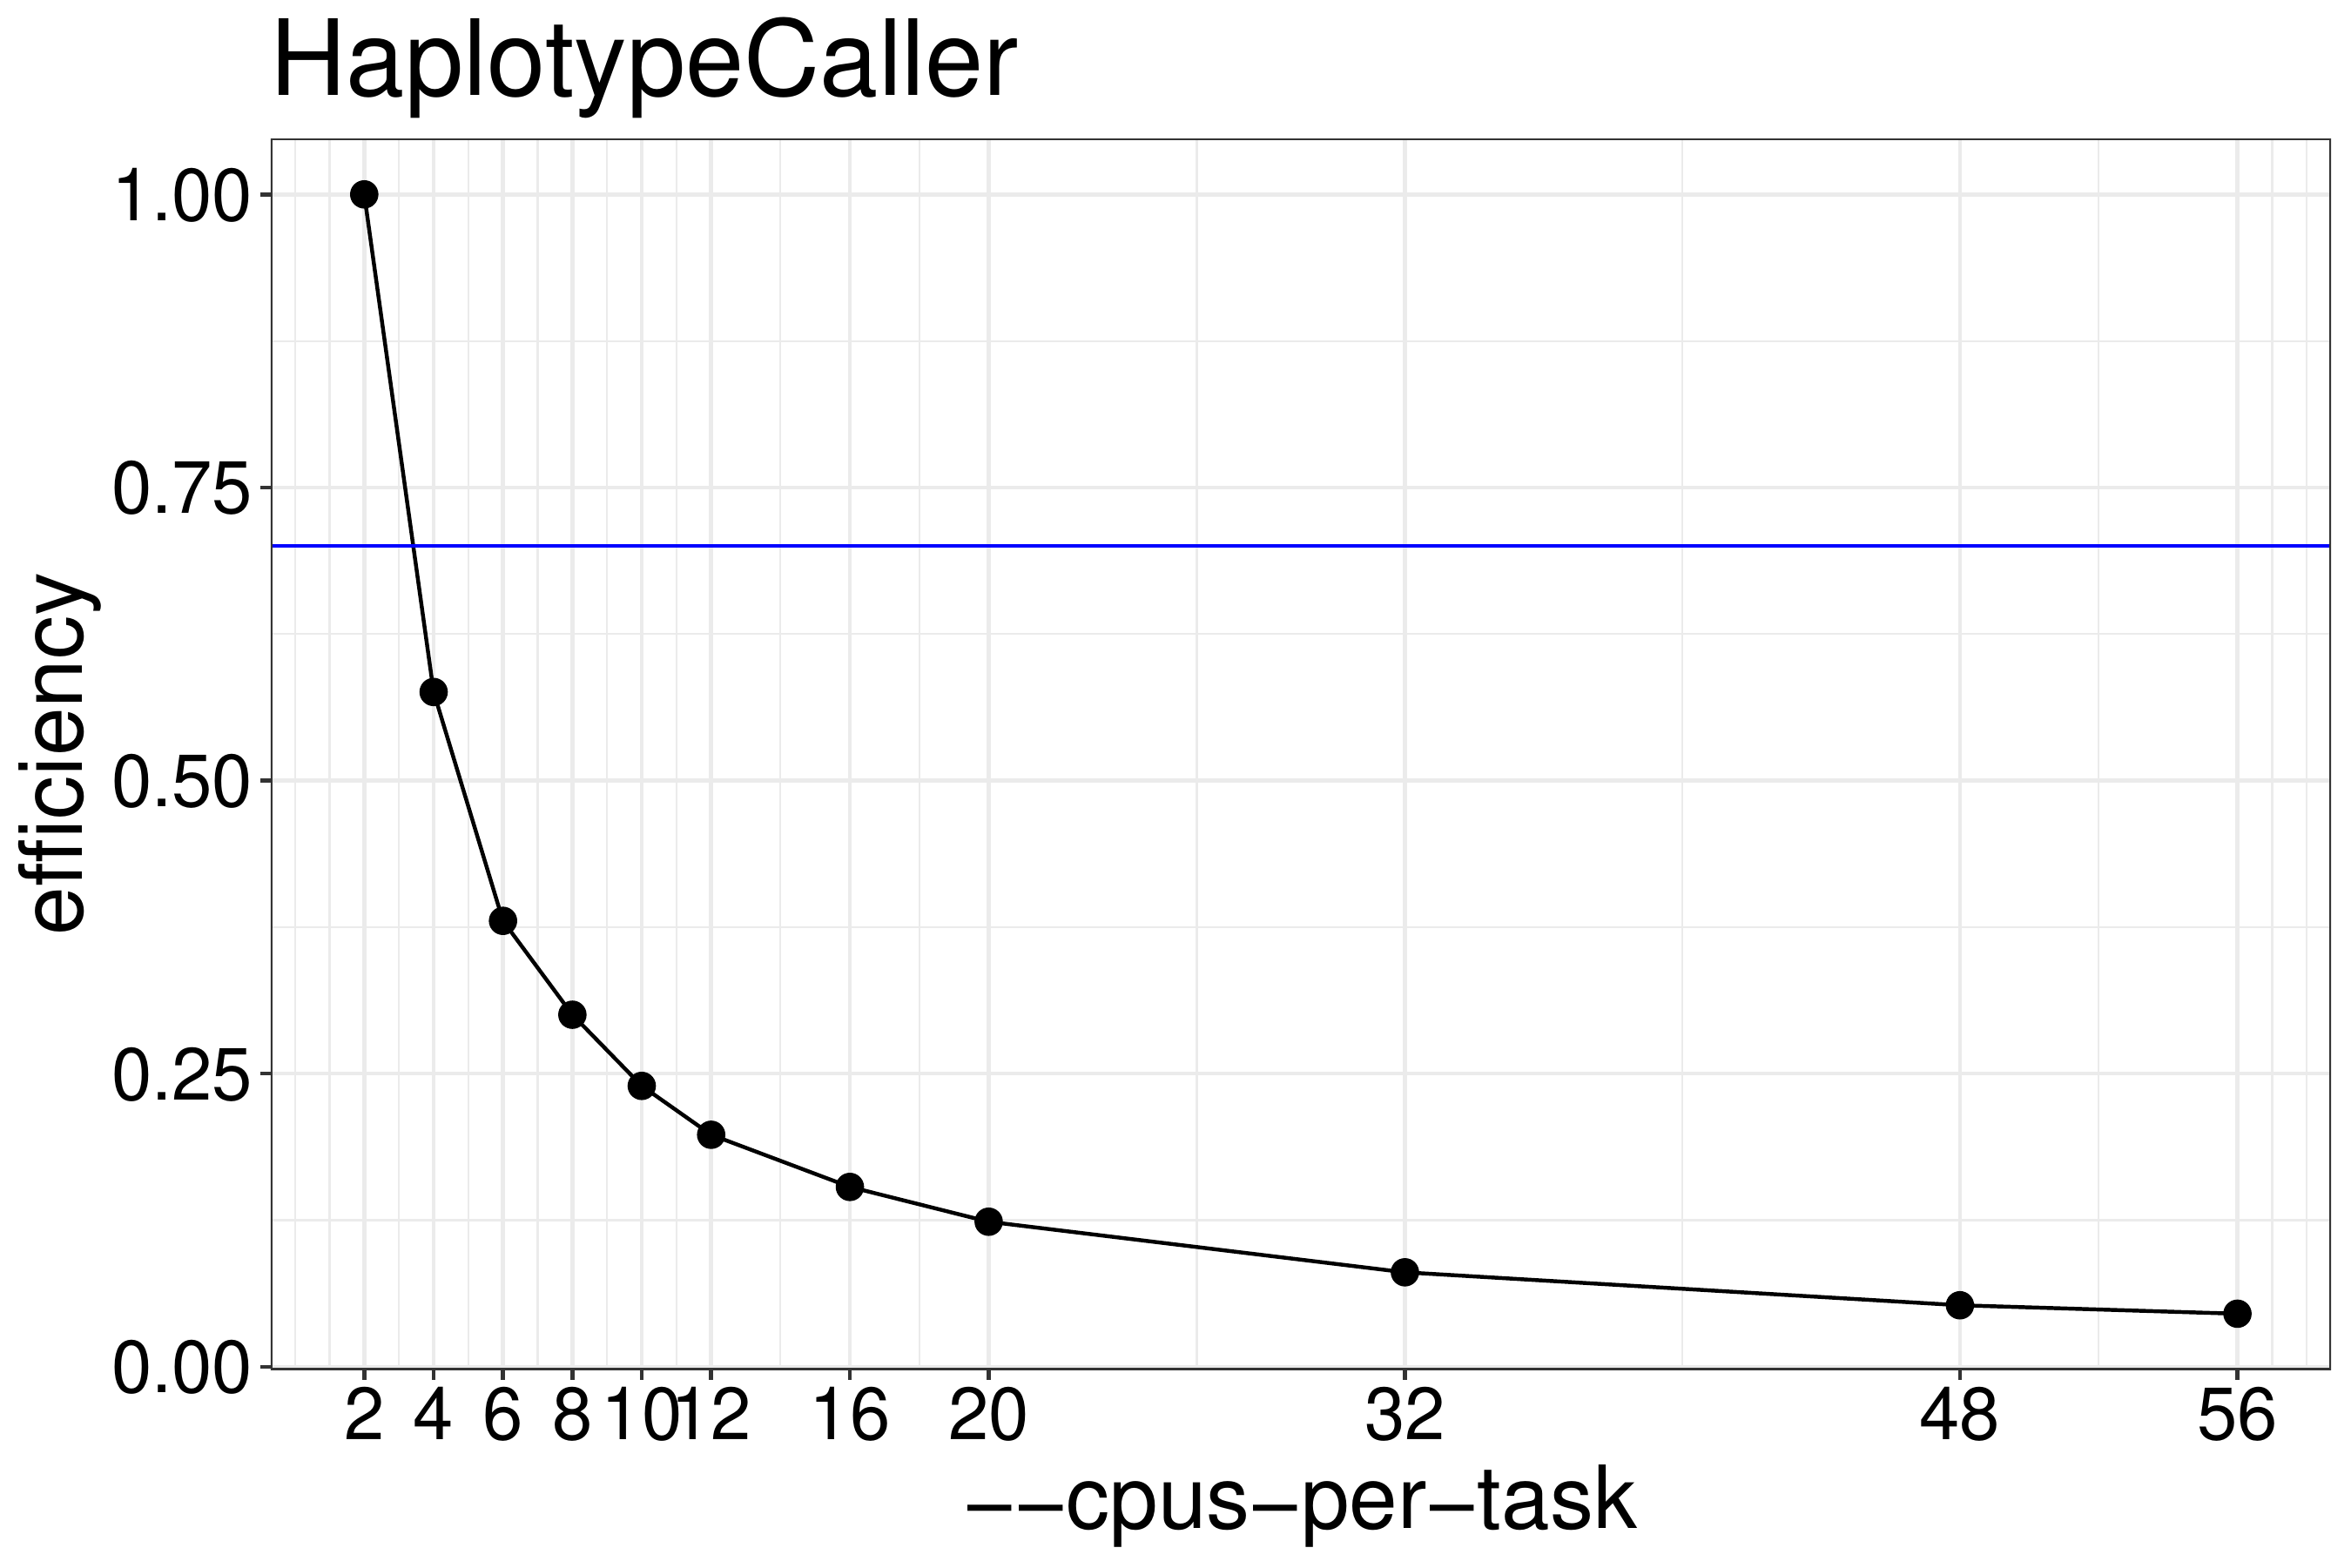 Efficiency of HaplotypeCaller as a function of the number of threads